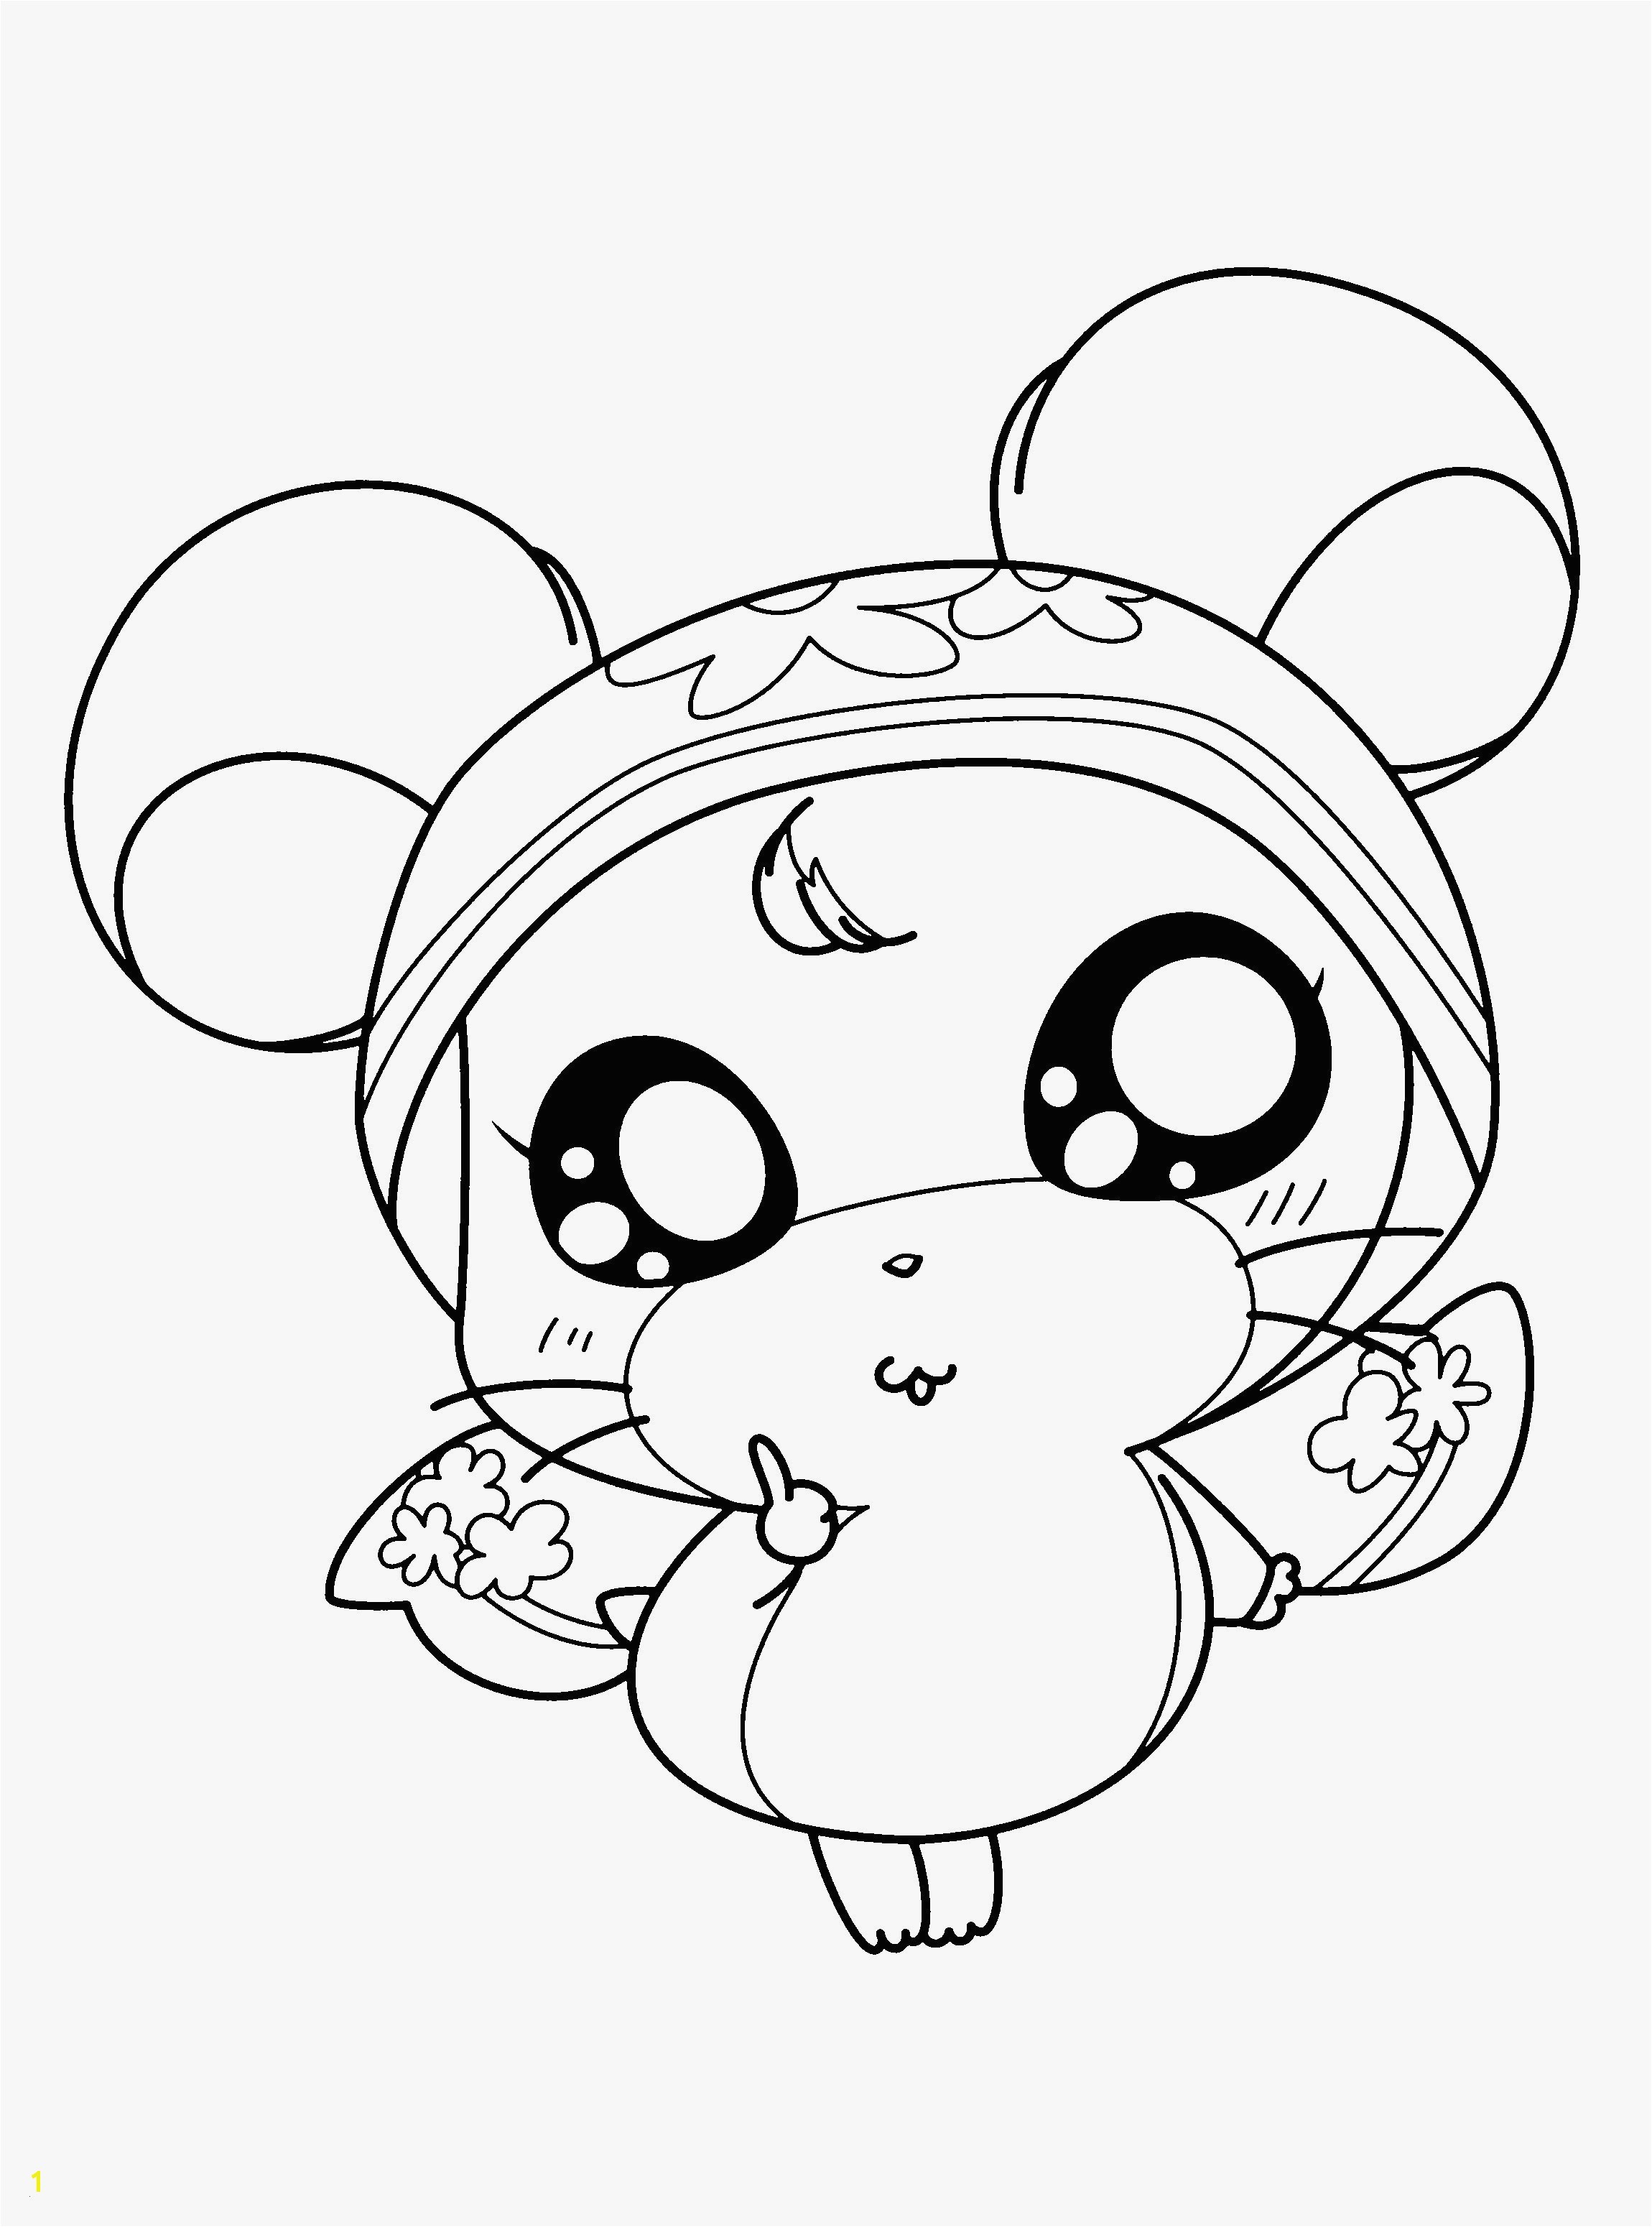 pokemon coloring pages for kids pokemon coloring pages printable fresh coloring printables 0d fun coloring pages coloring pages of cute baby